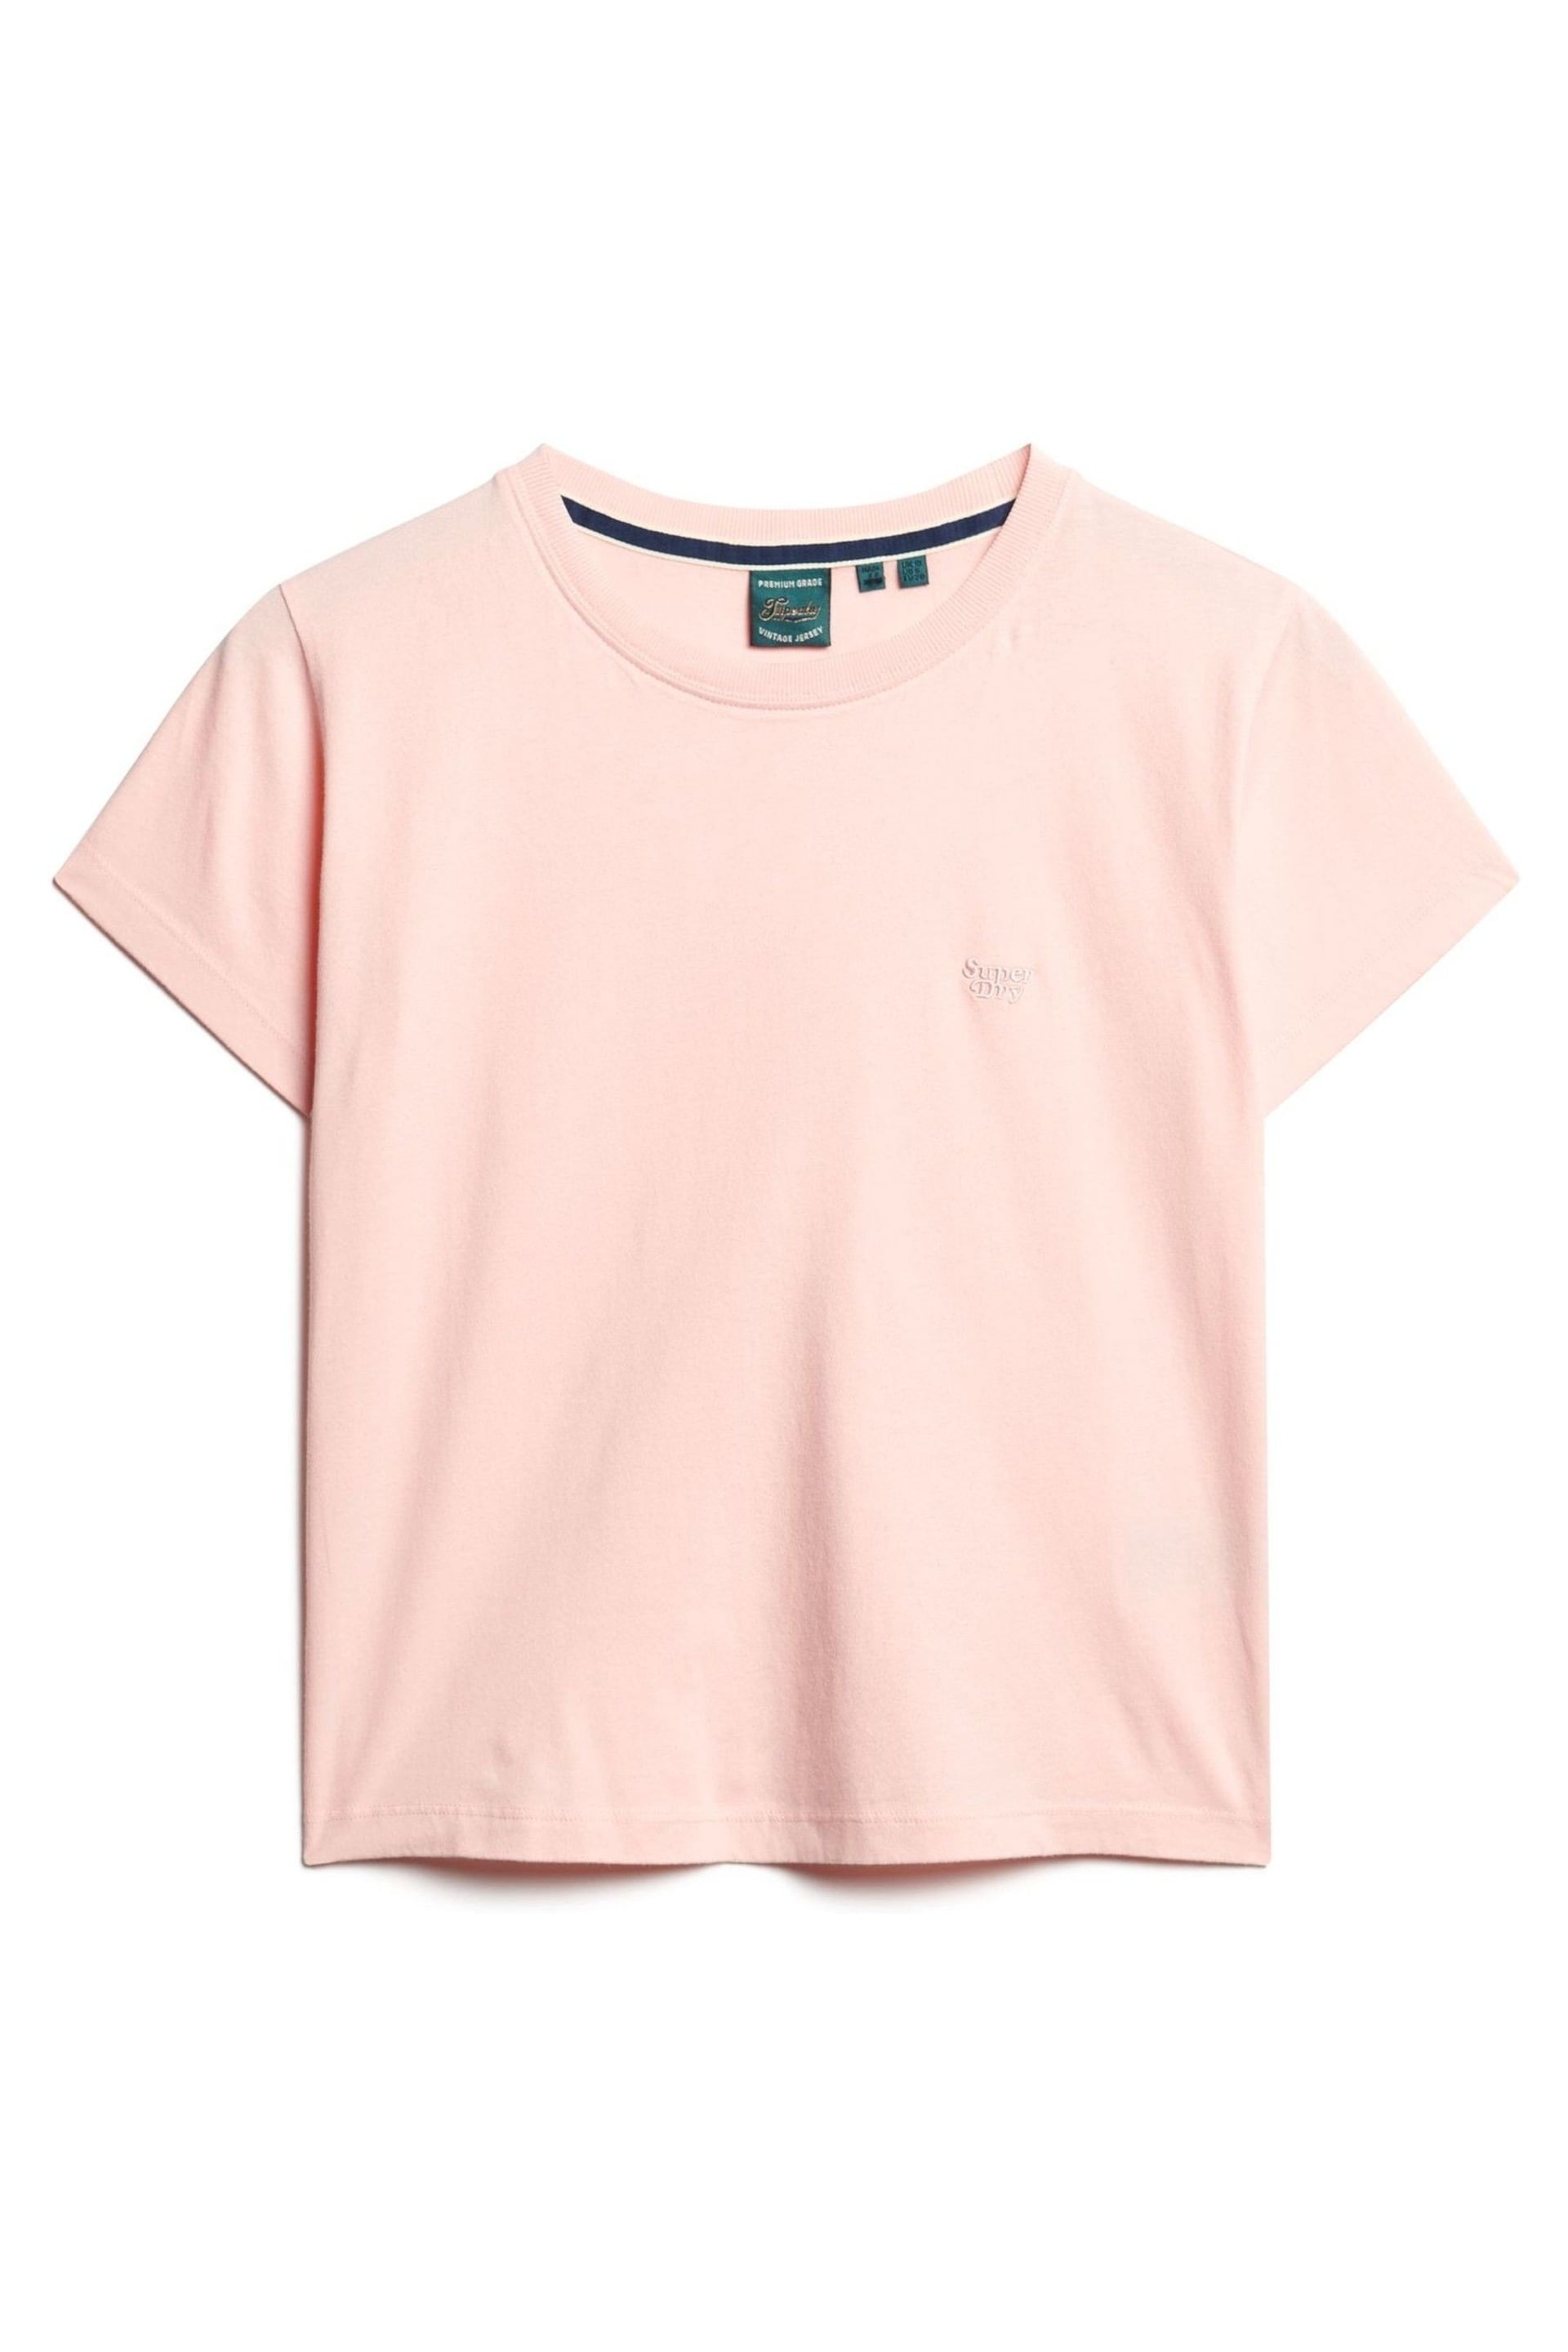 Superdry Pink Essential Logo 90's T-Shirt - Image 4 of 6